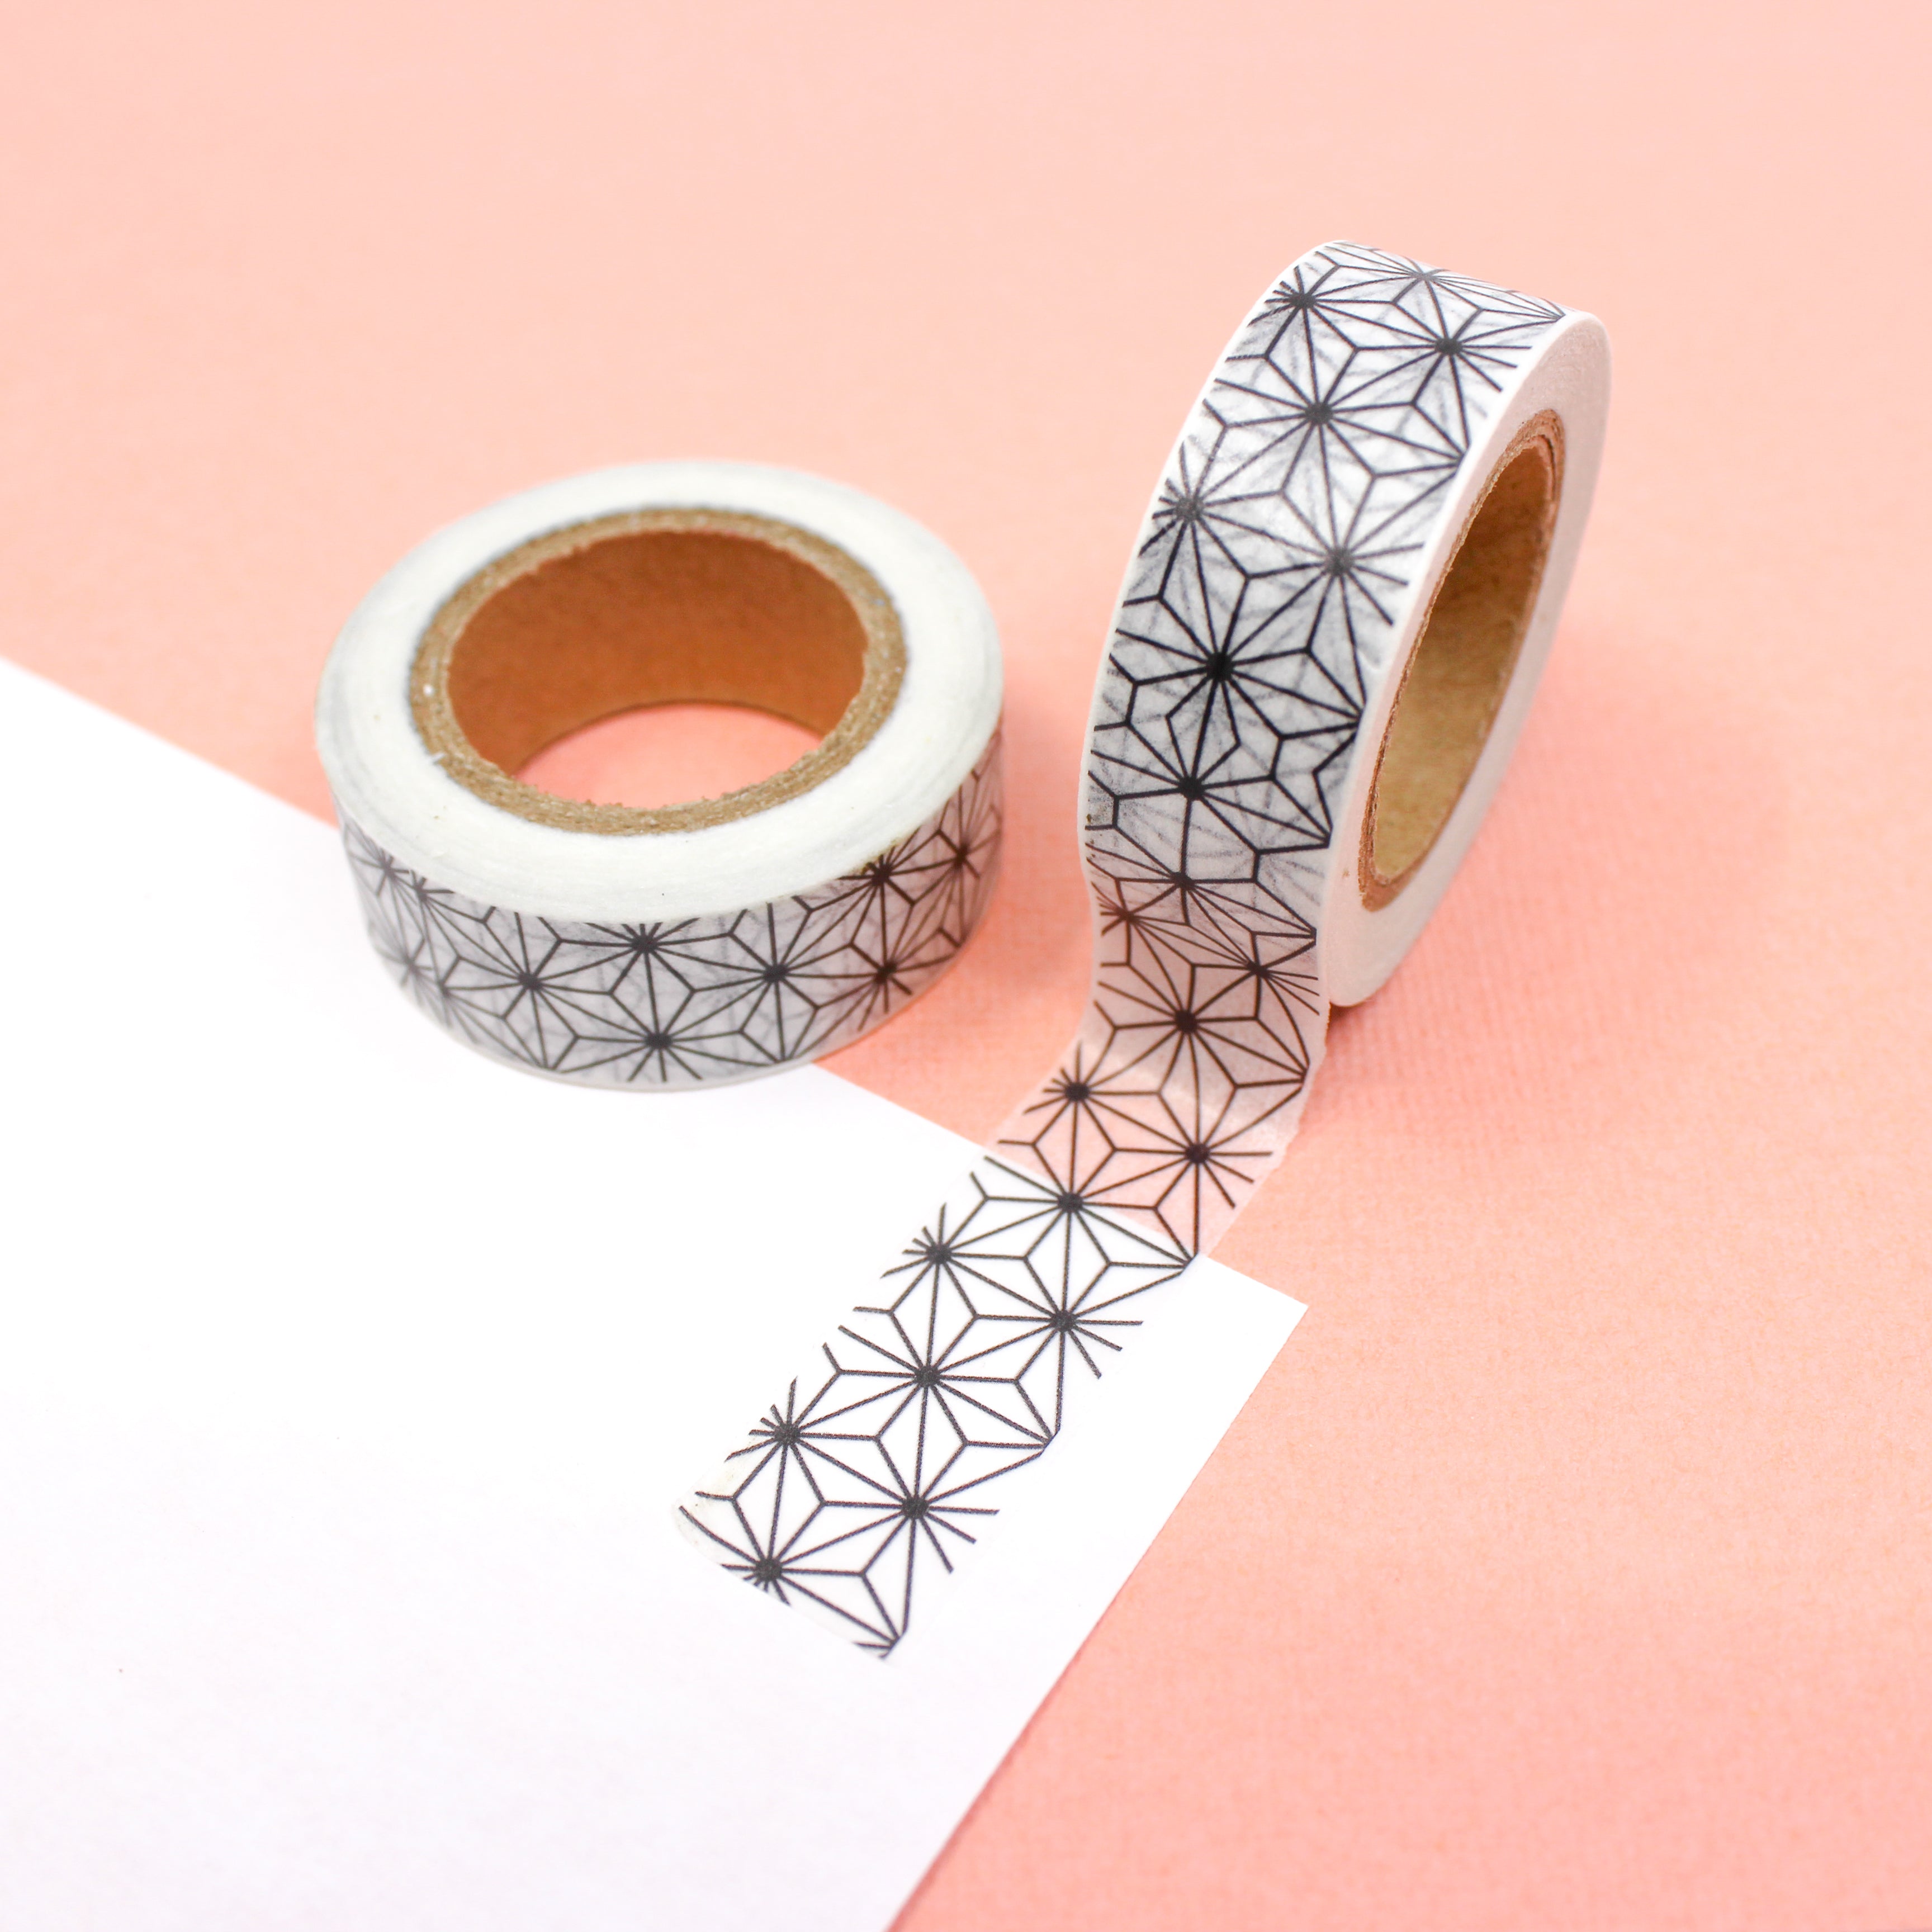 This is a black geometric star flowers pattern washi tape from BBB Supplies Craft Shop